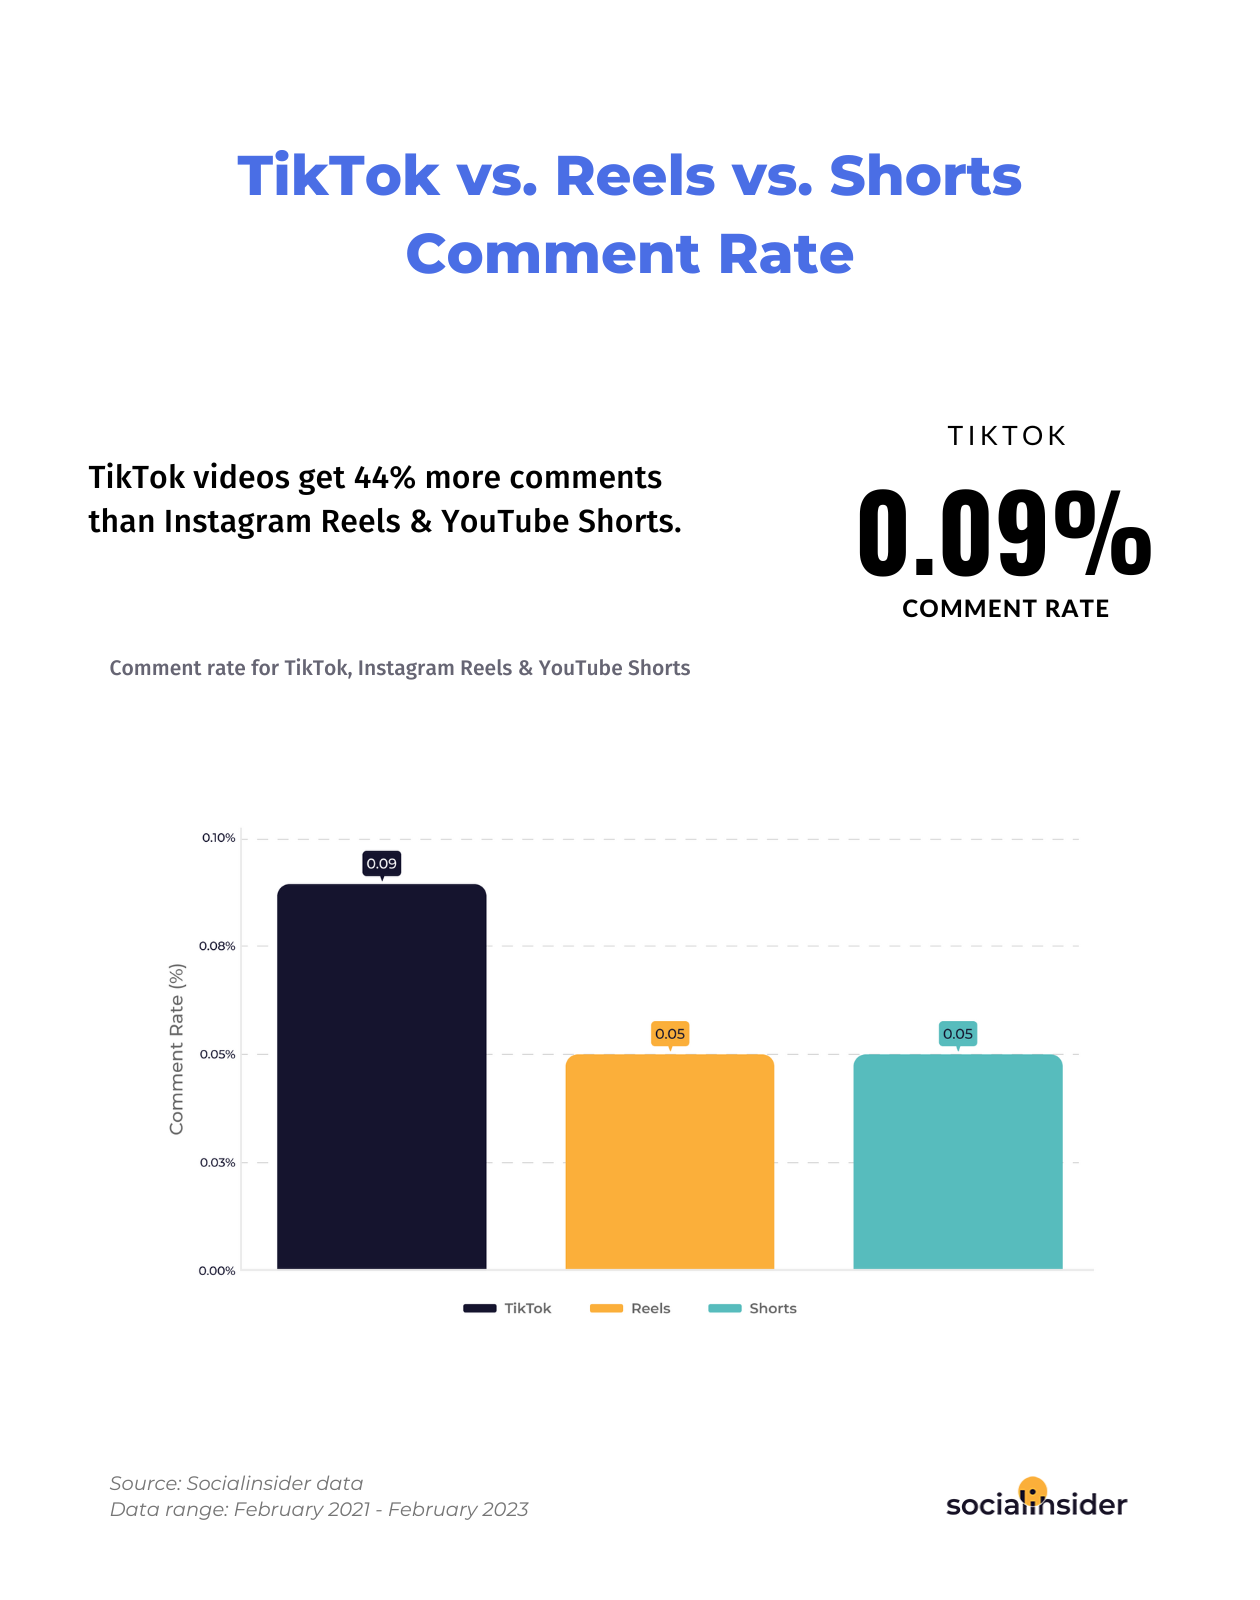 Shorts Summer 2023 Updates: How  Shorts New Capabilities  Compare to TikTok and Instagram Reels - Captiv8